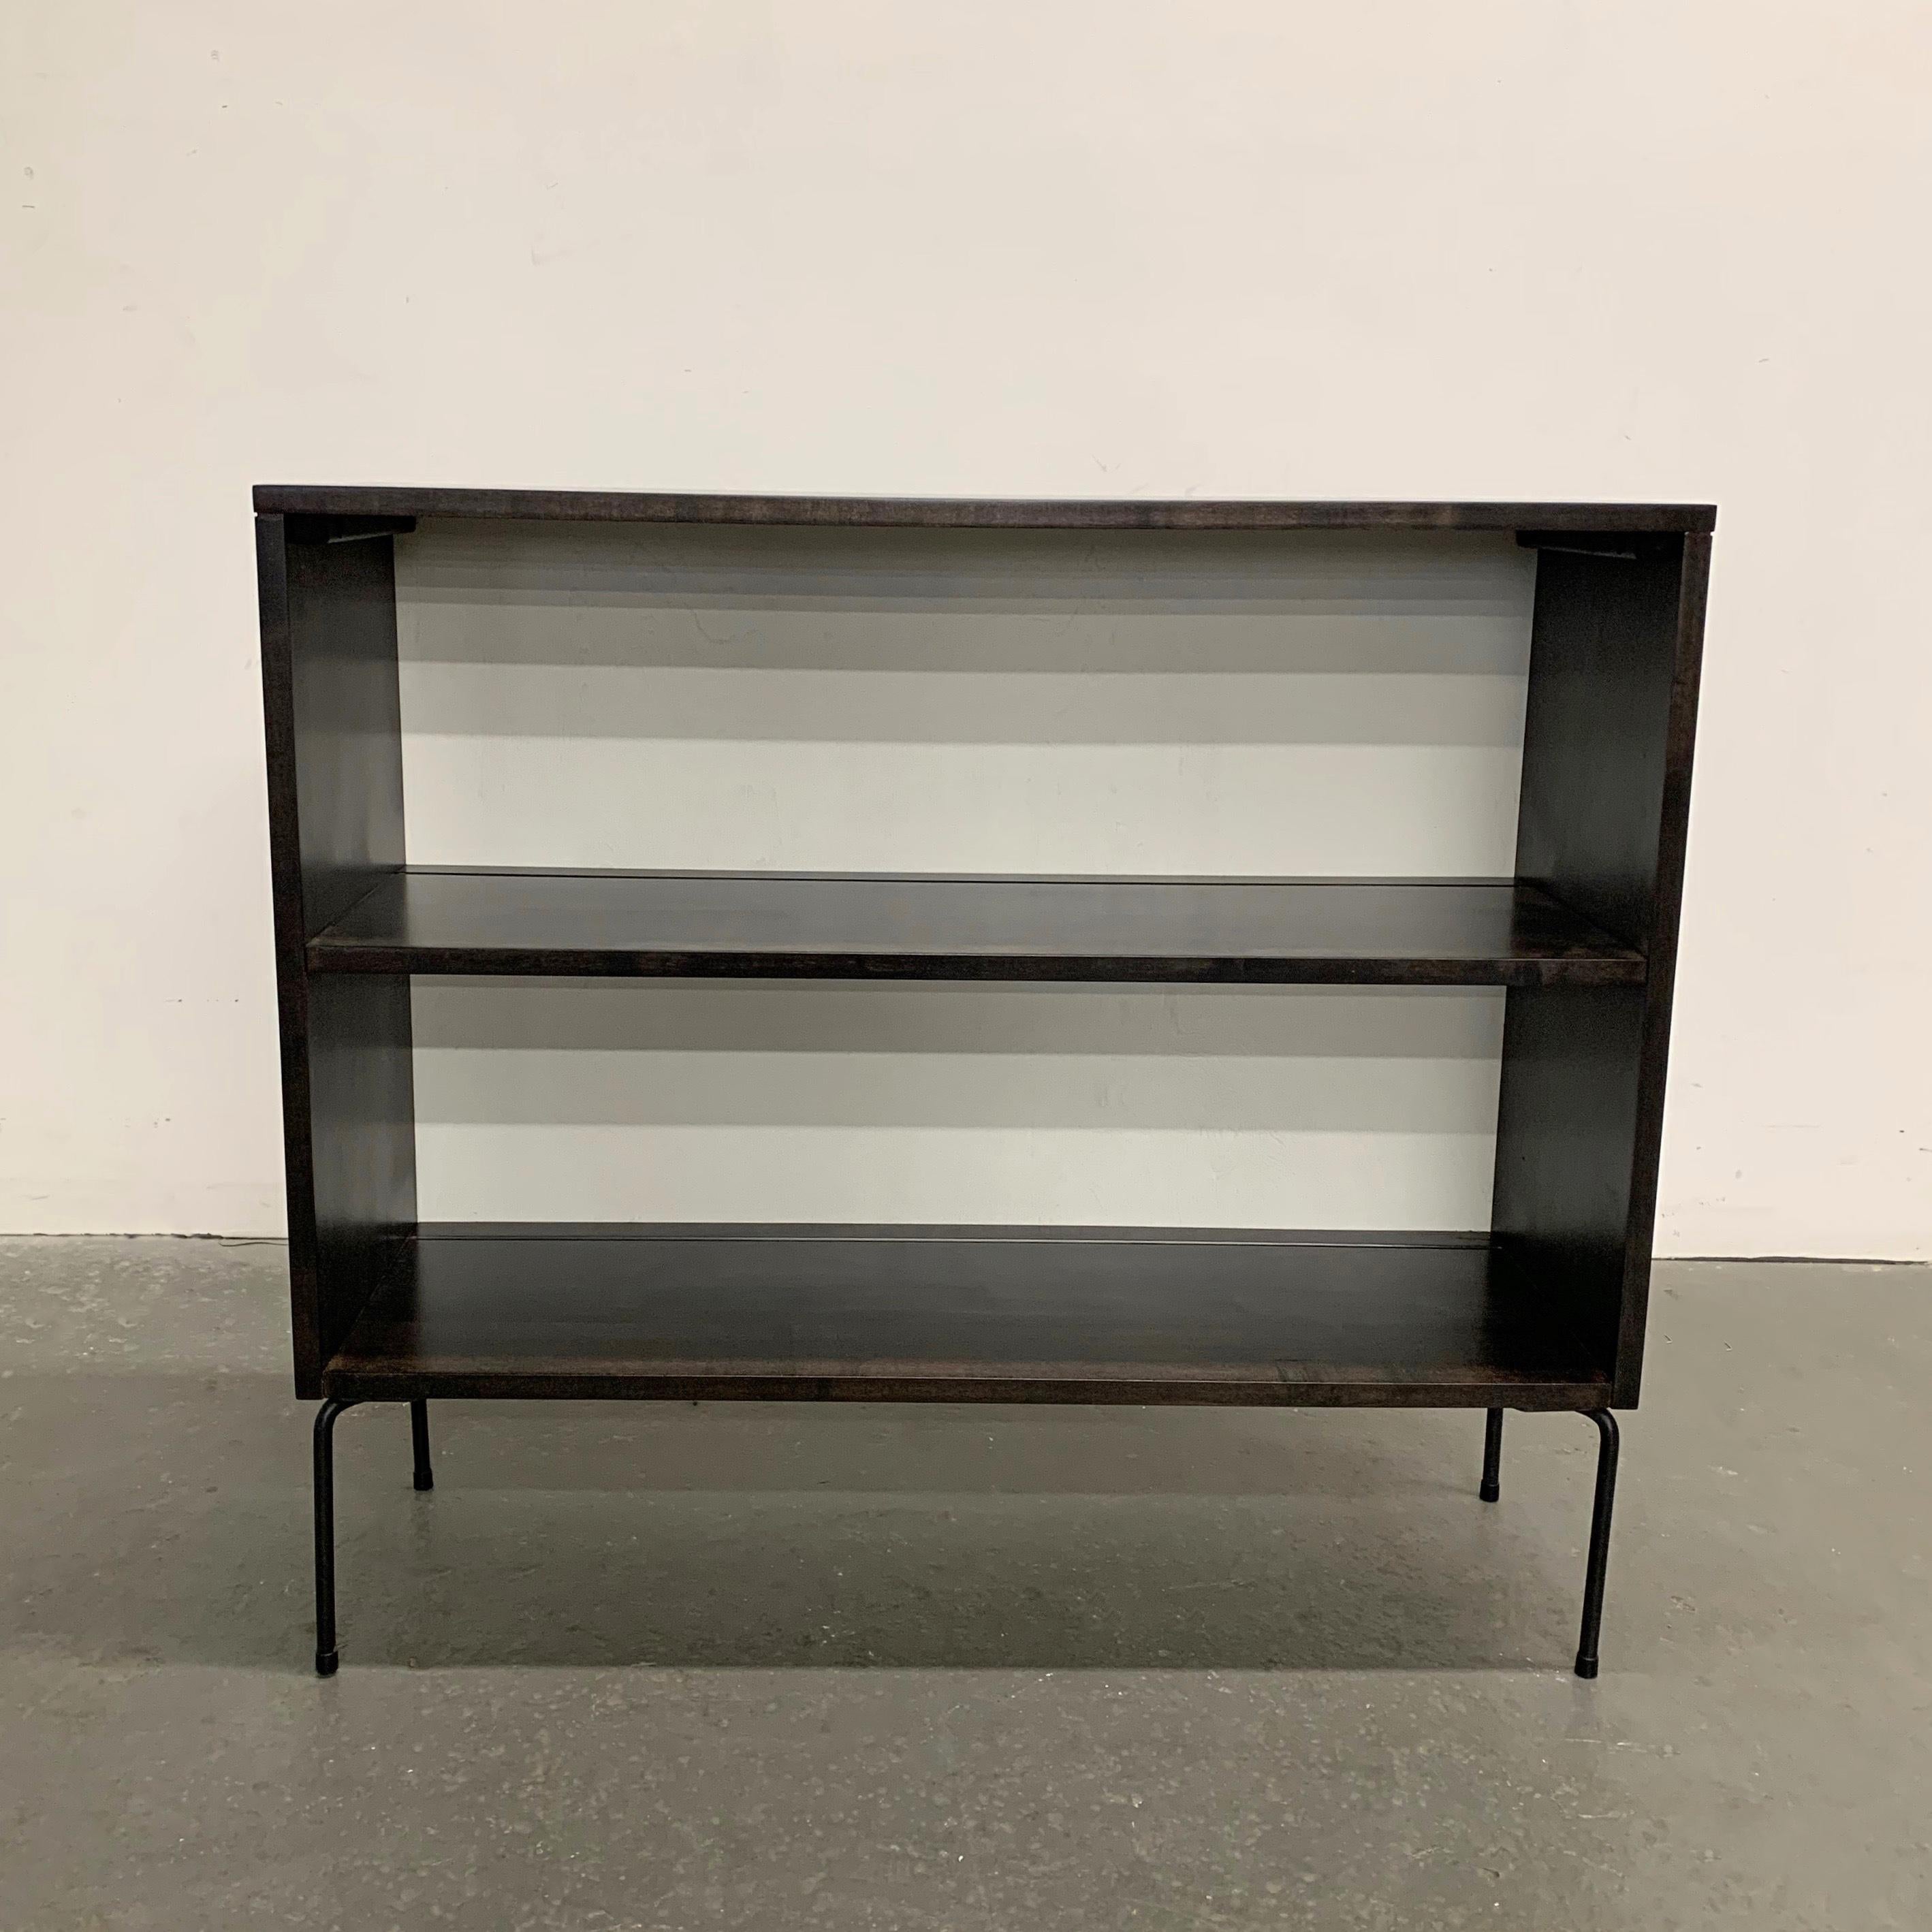 Mid-Century Modern, ebonized maple, open bookcase or display cabinet with newly added wrought iron legs.